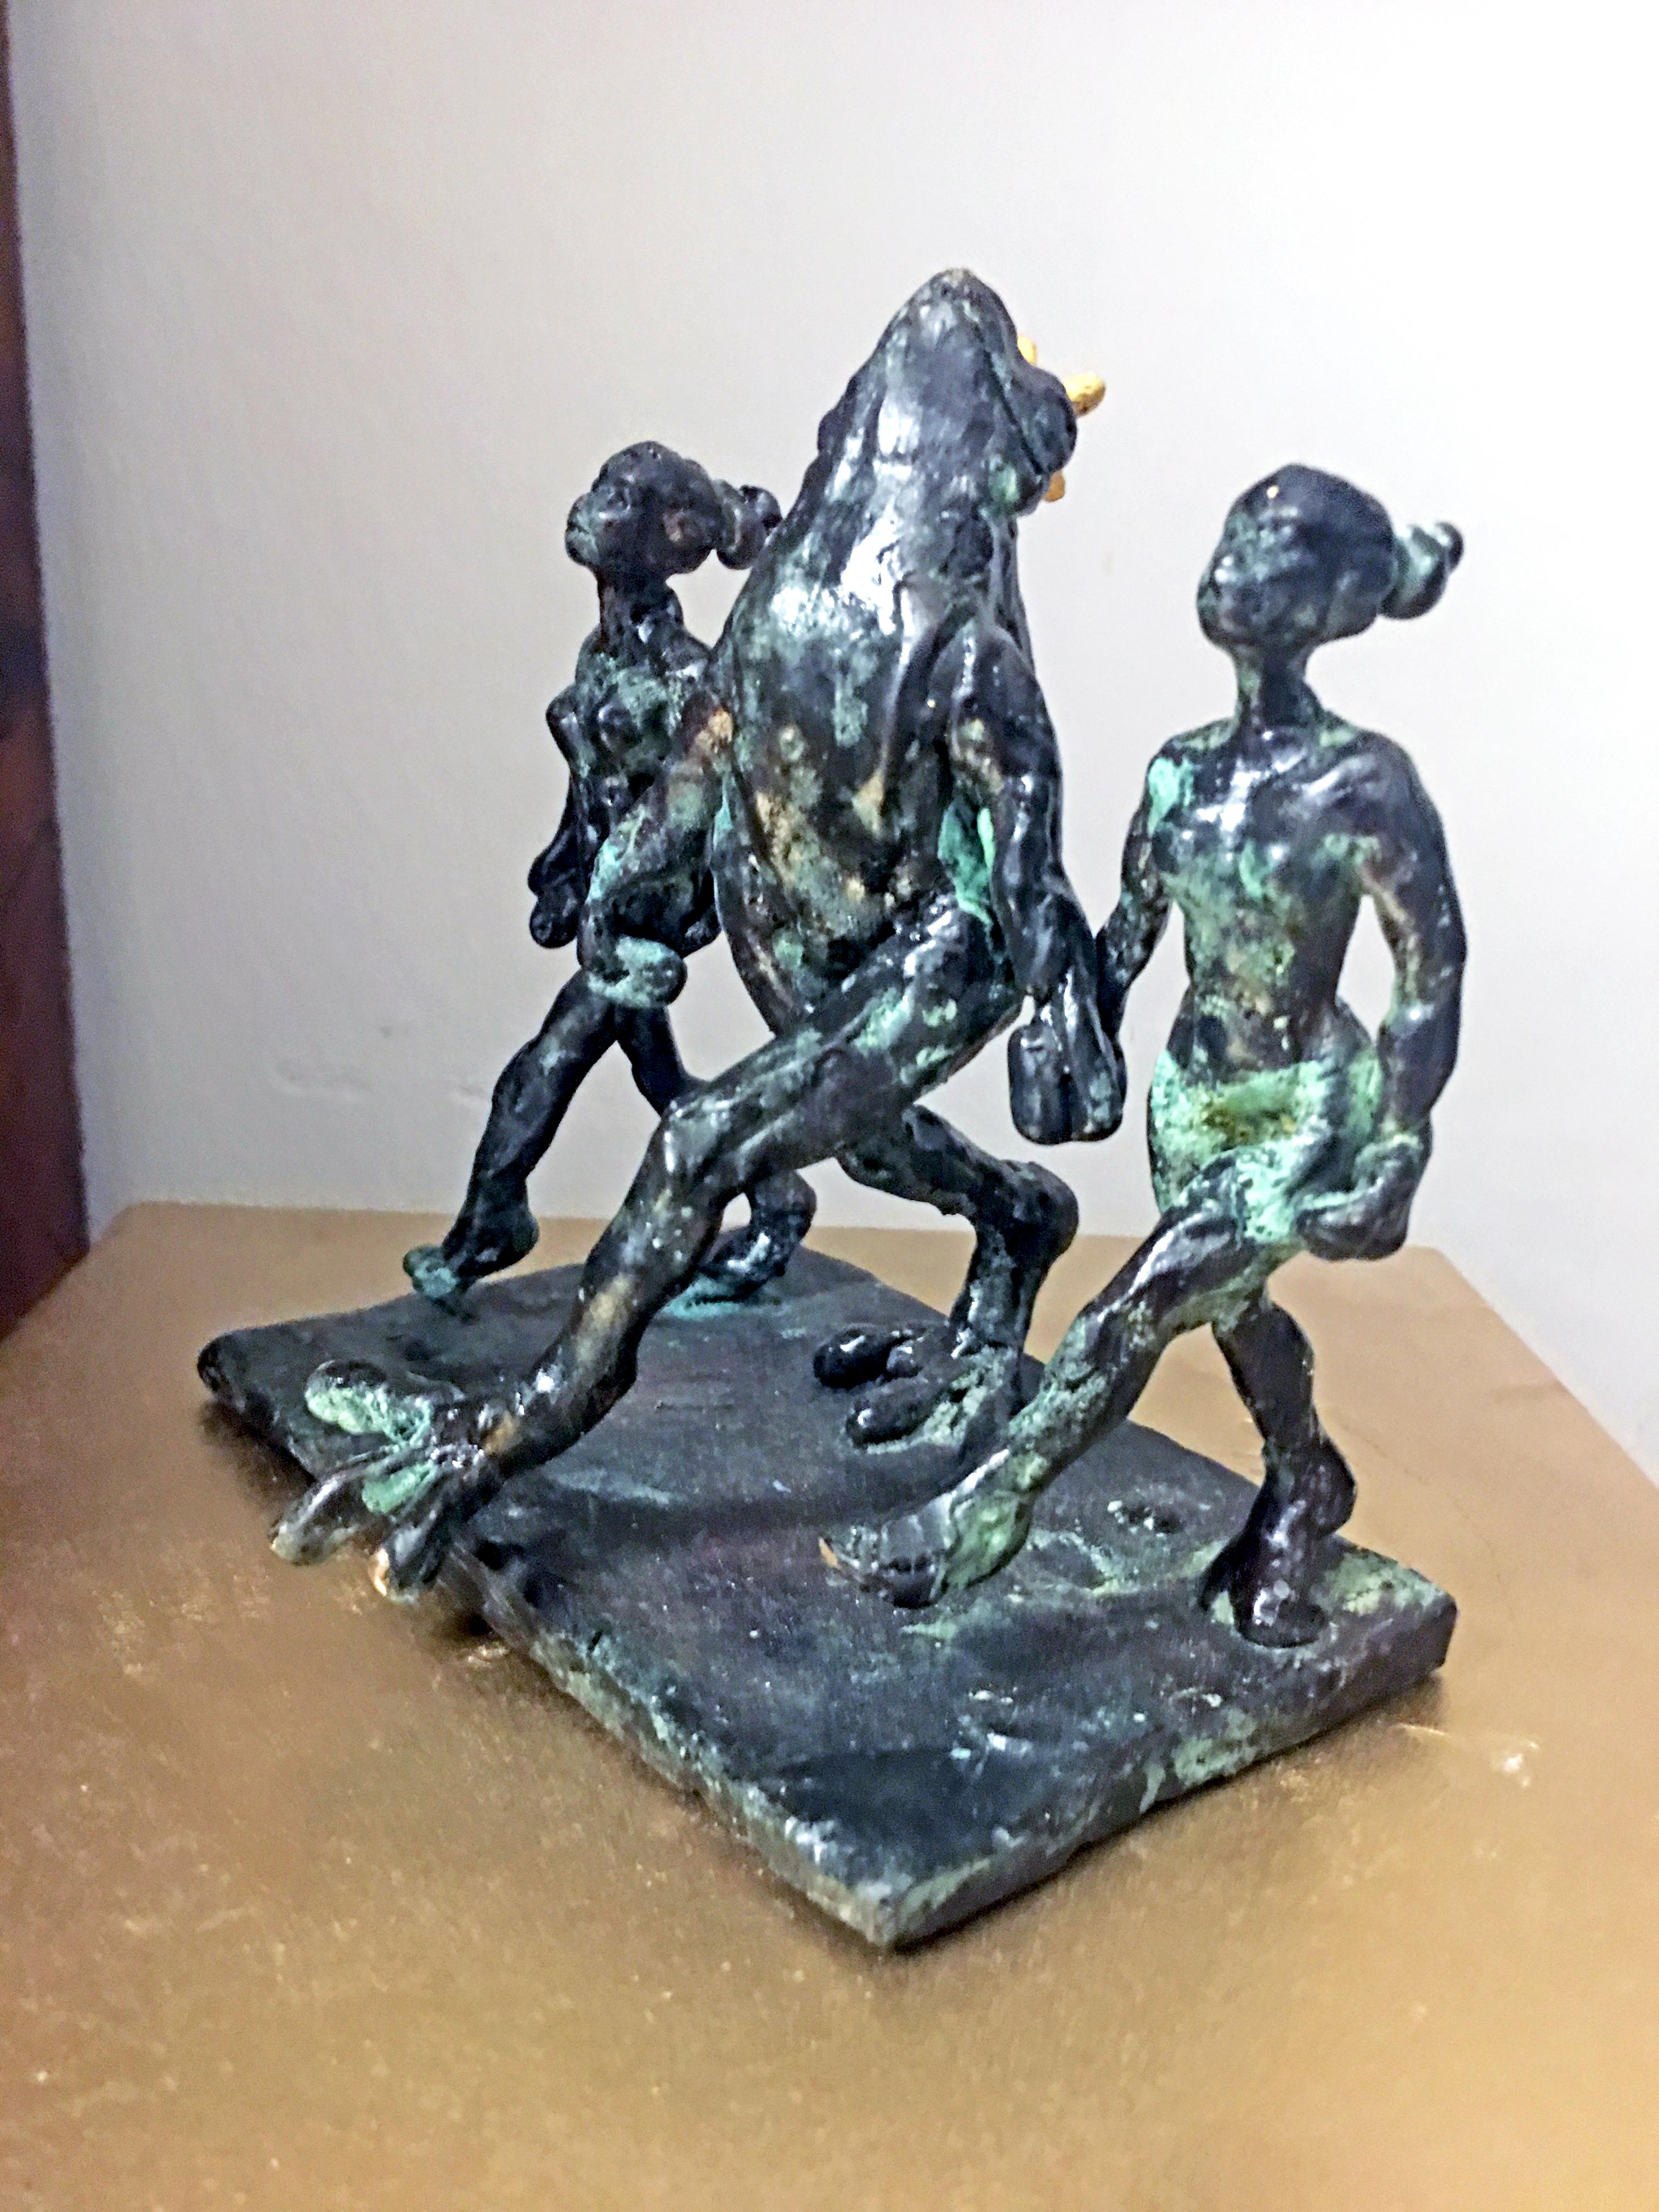 Riverdance for Frog Prince by Helle Crawford, Green Black Bronze sculpture - Contemporary Sculpture by Helle Rask Crawford